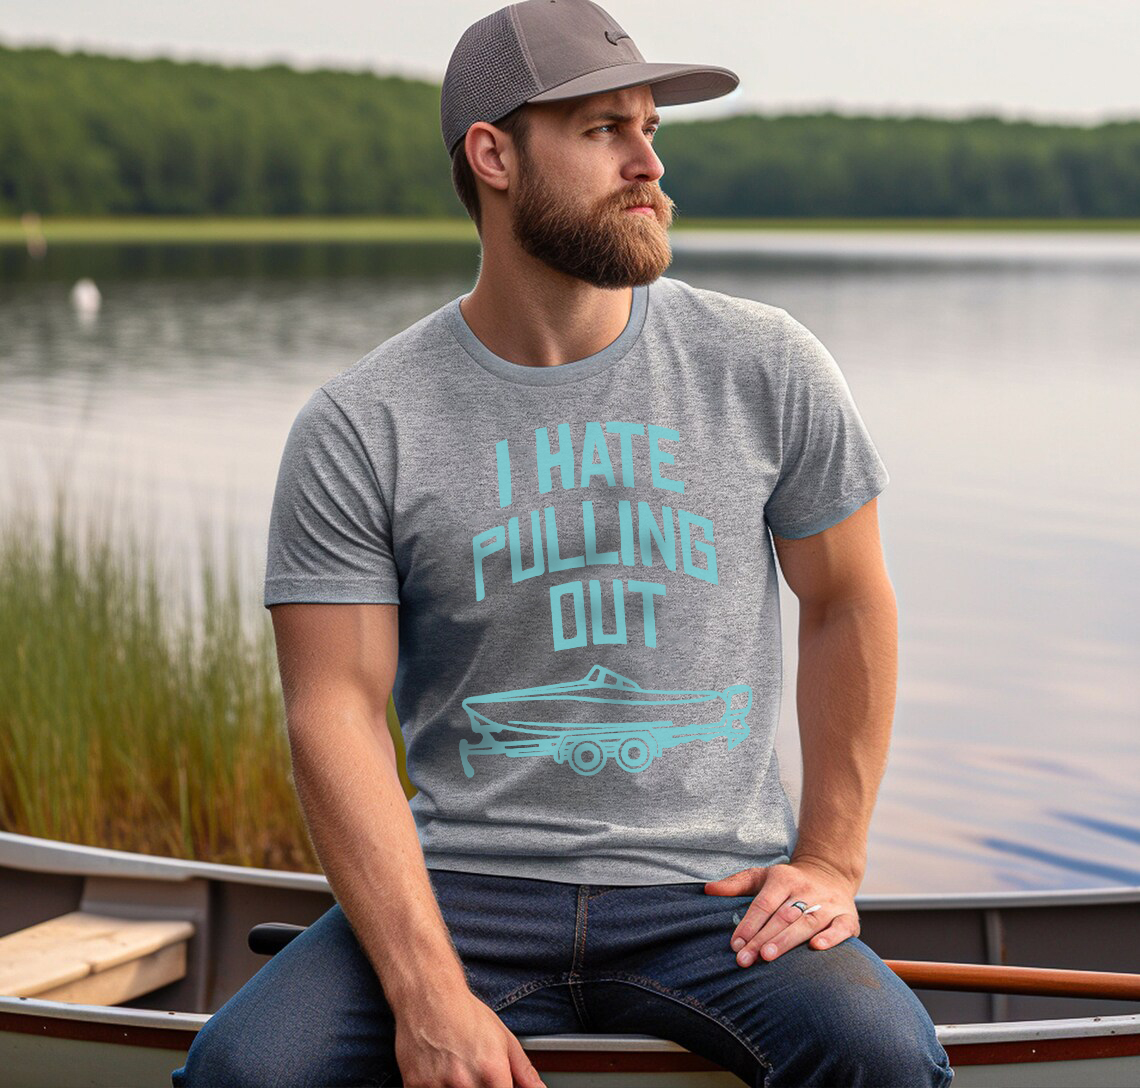 I hate Pulling out, Boat t-shirt, funny adult humor